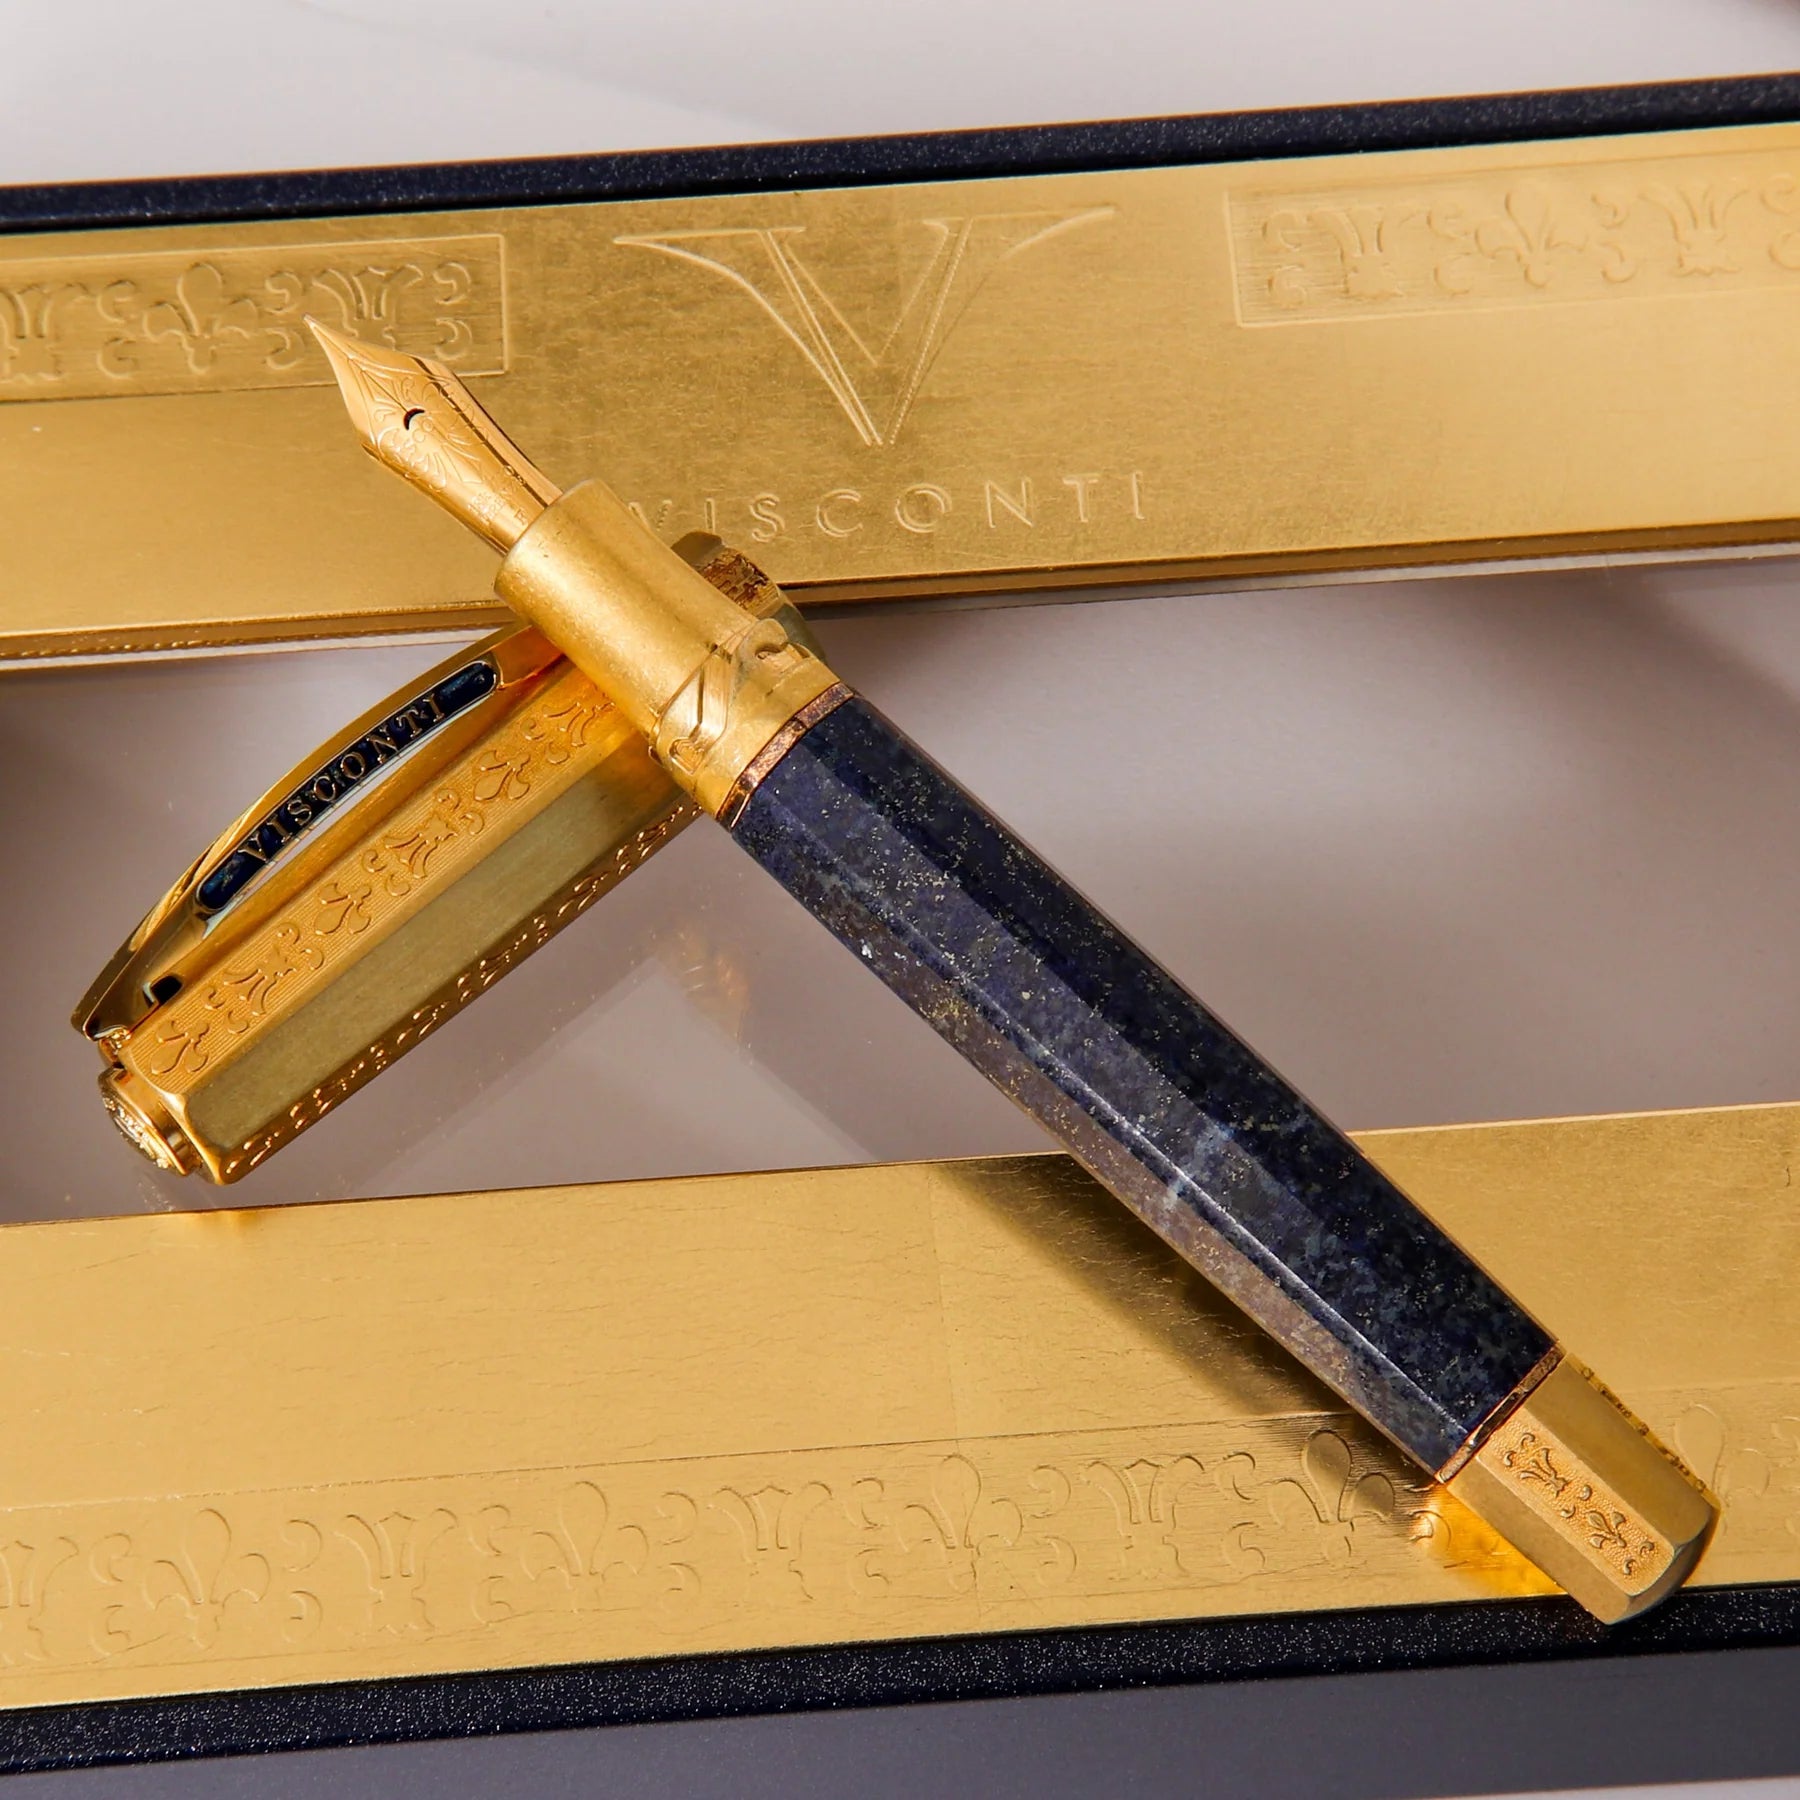 Luxury Pen with Gift Box - The Perfect Elegance Gift (Golden Rose)